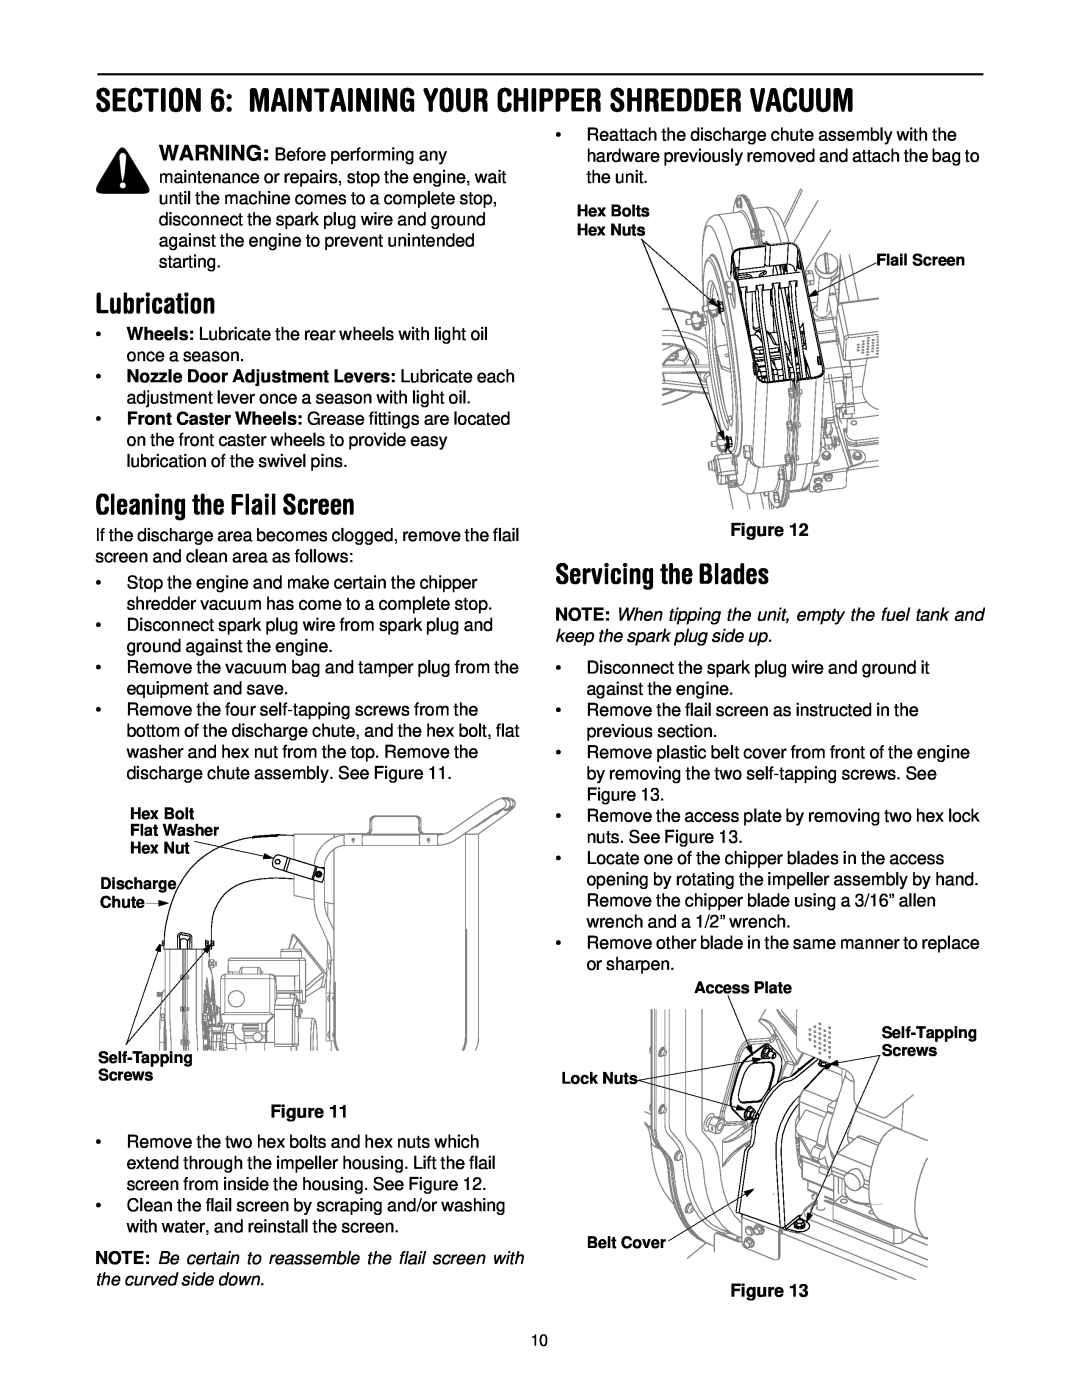 Troy-Bilt CSV206 Maintaining Your Chipper Shredder Vacuum, Lubrication, Cleaning the Flail Screen, Servicing the Blades 